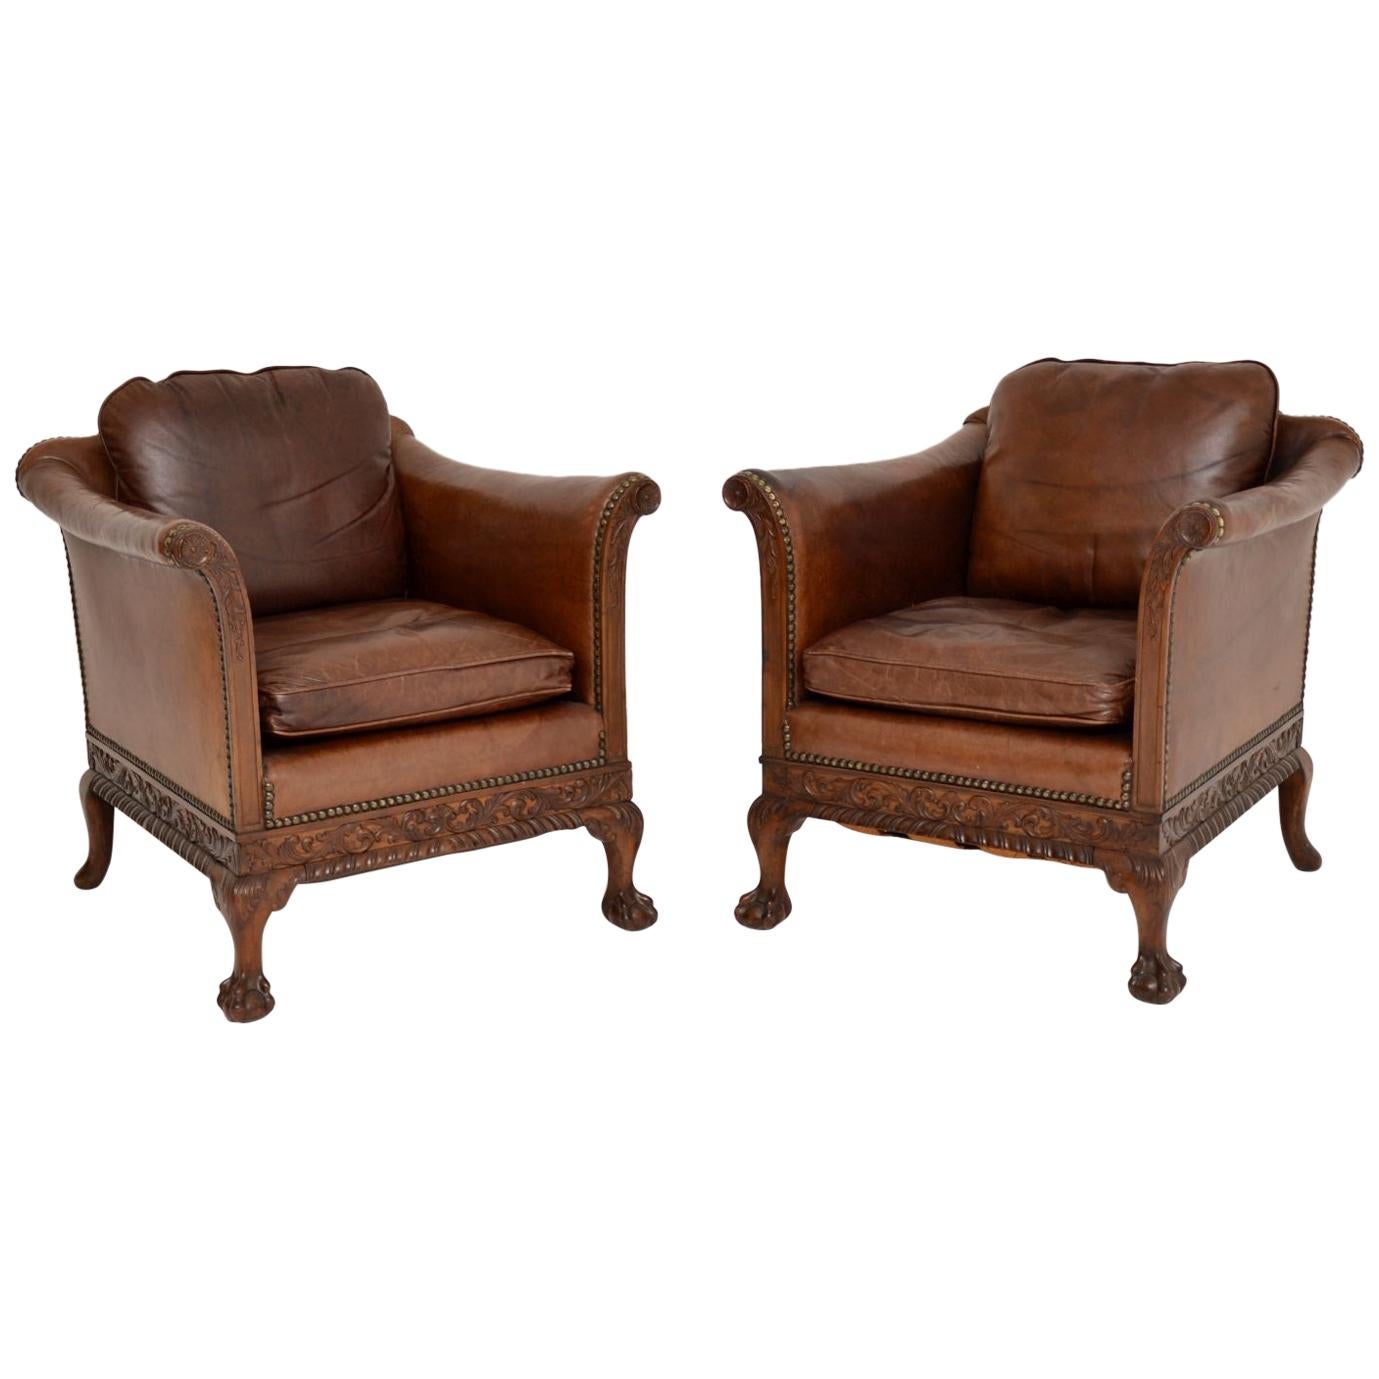 Pair of Antique Swedish Leather & Mahogany Armchairs